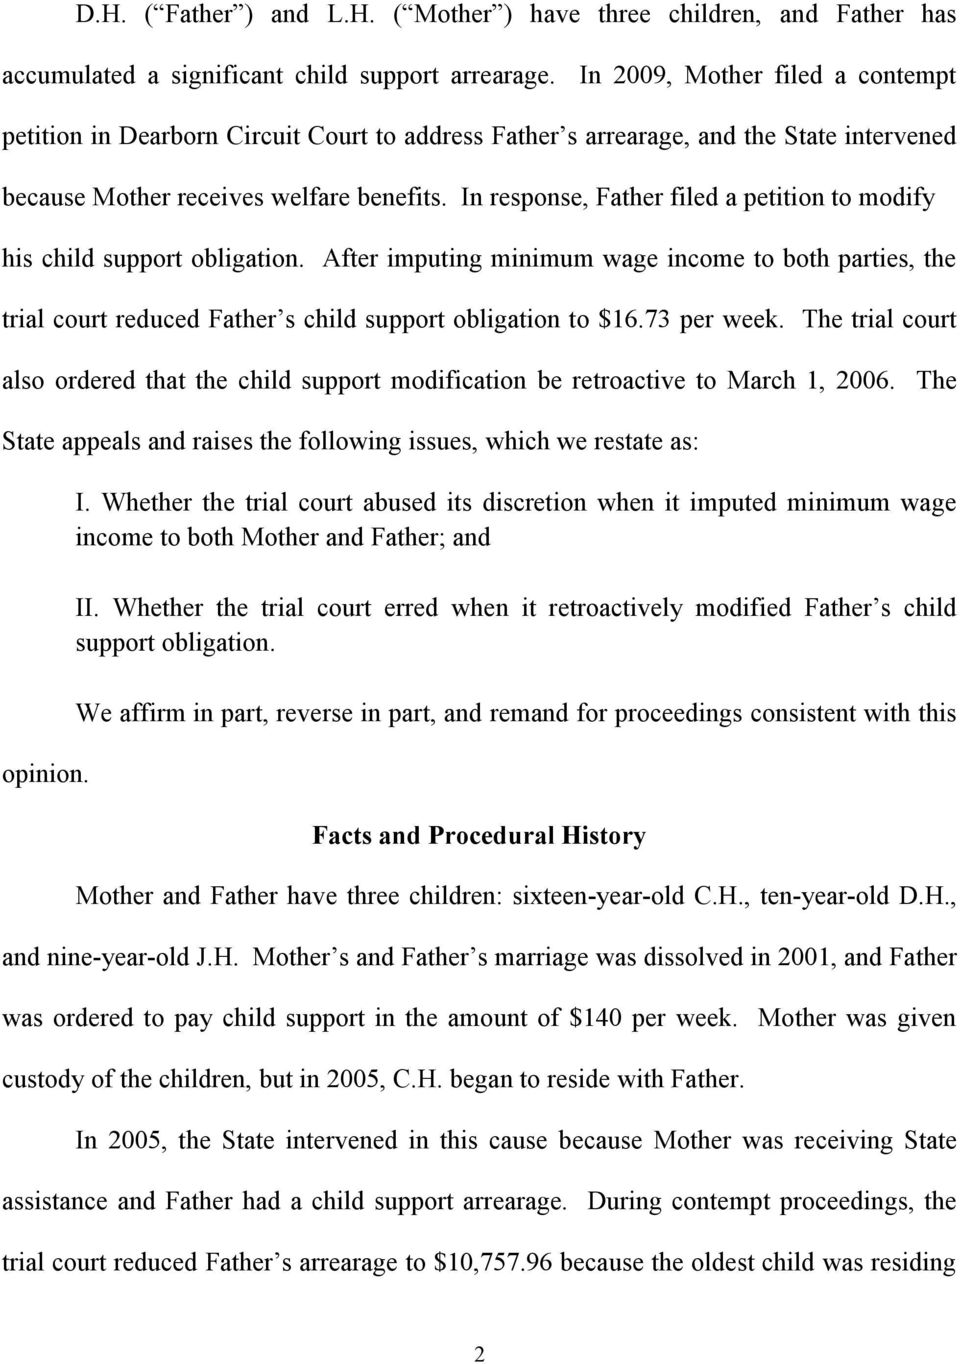 In response, Father filed a petition to modify his child support obligation. After imputing minimum wage income to both parties, the trial court reduced Father s child support obligation to $16.